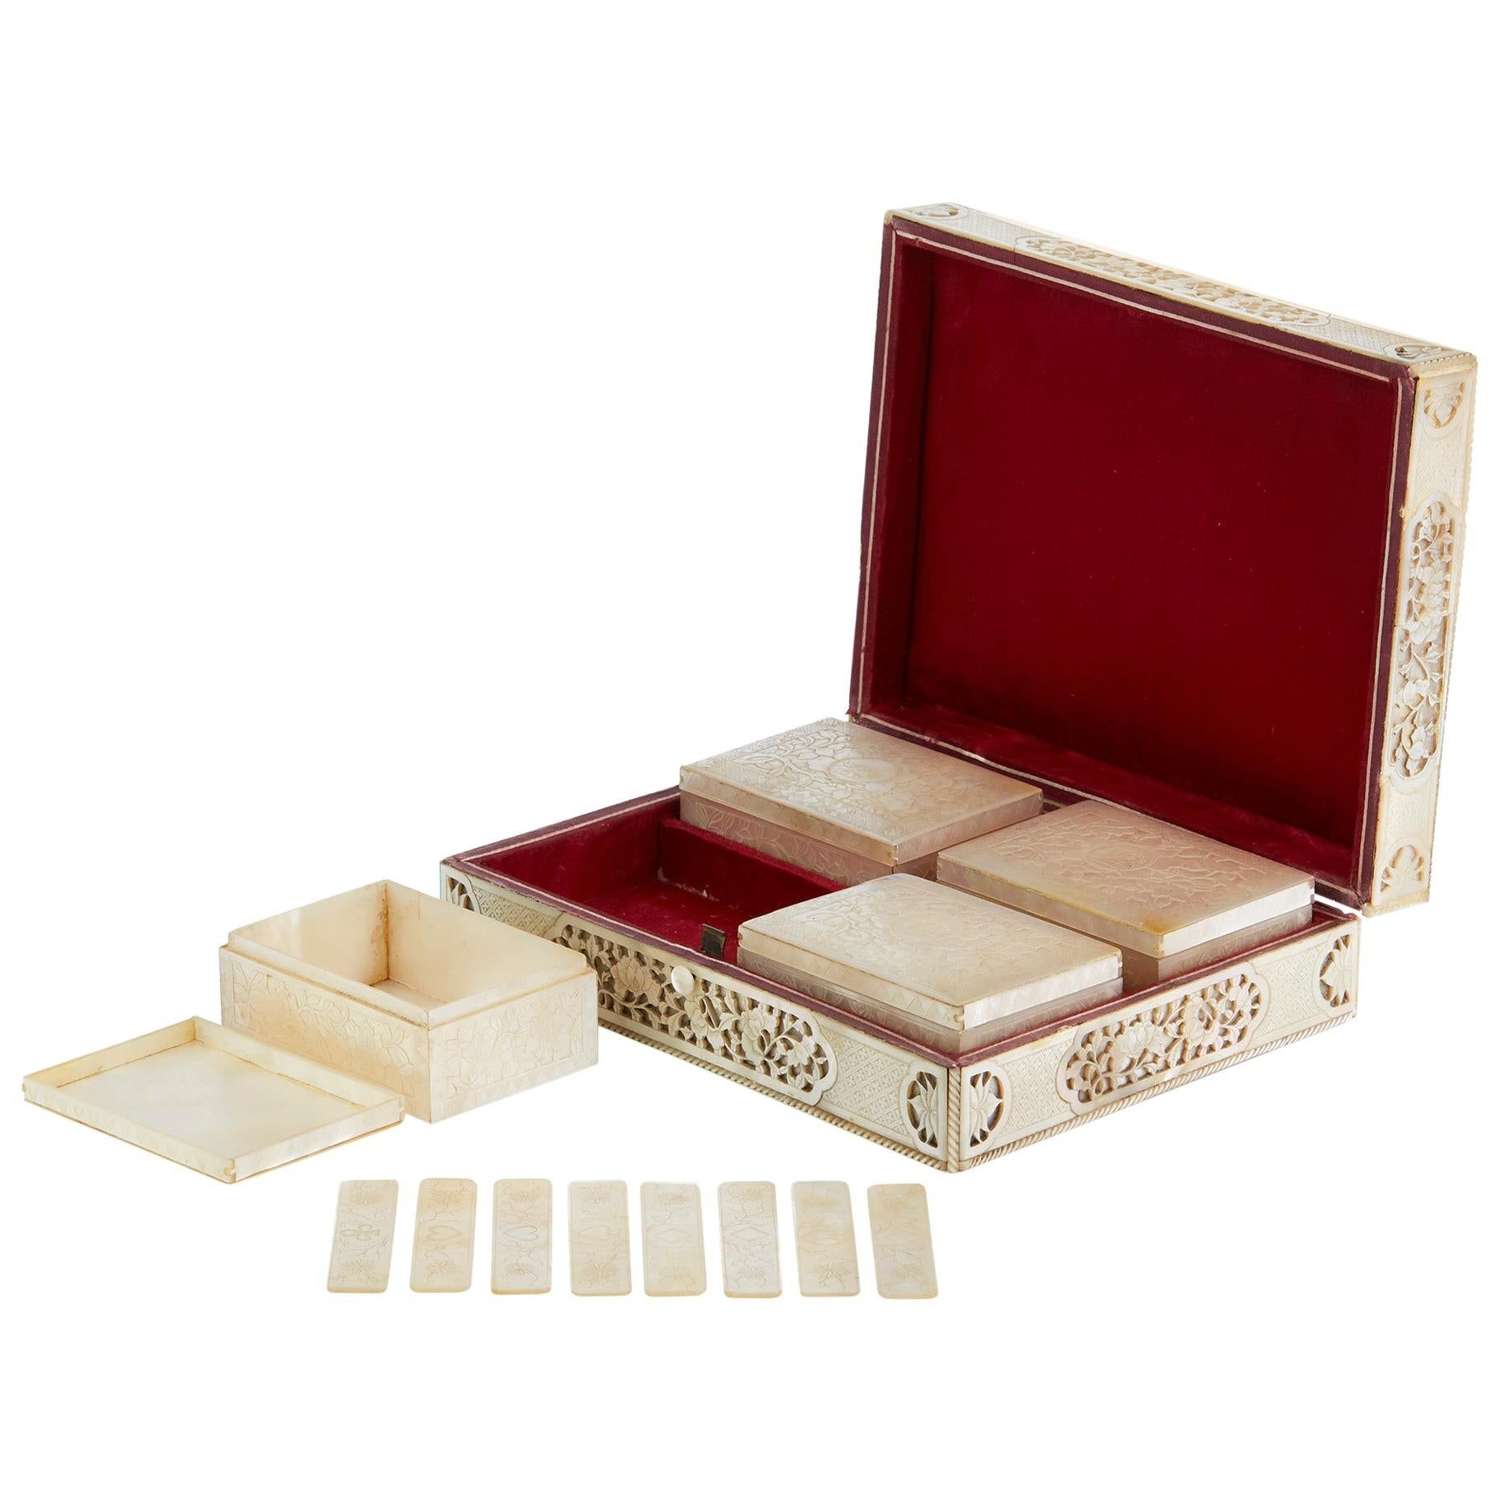 Chinese Mother of Pearl Mounted Box with Four Boxes and Counters, 18th